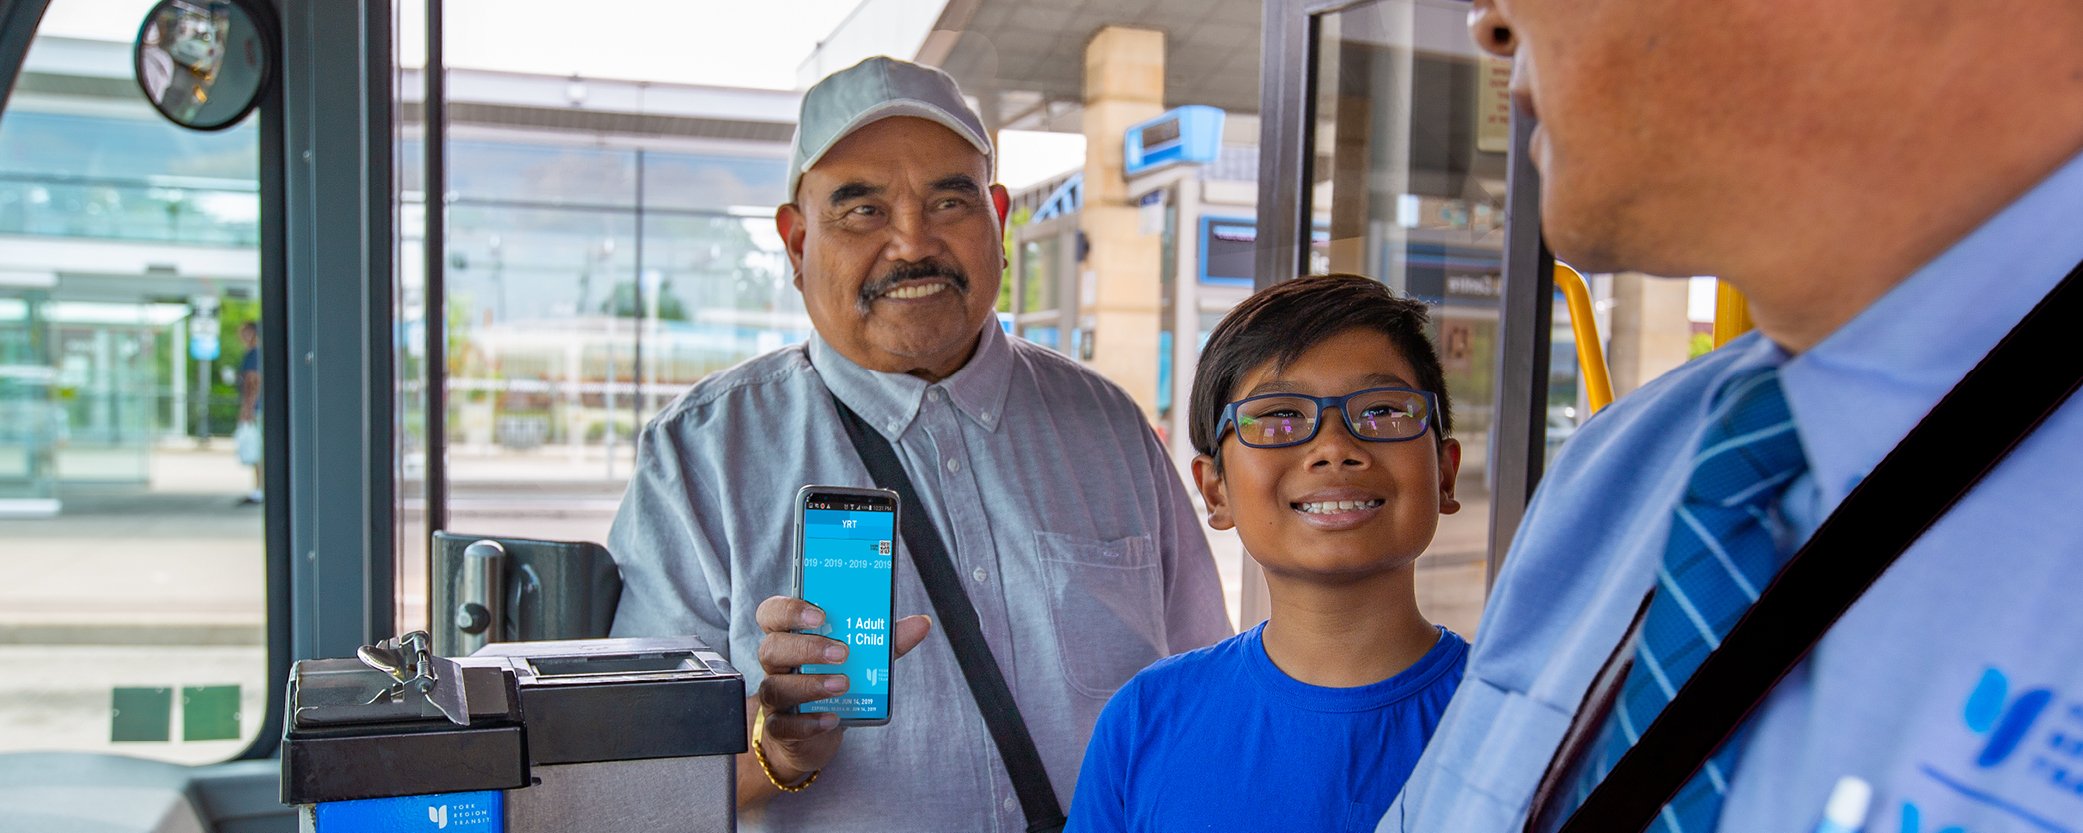 Photo of a senior with his grandson showing the bus driver proof of payment on the YRT Pay app.